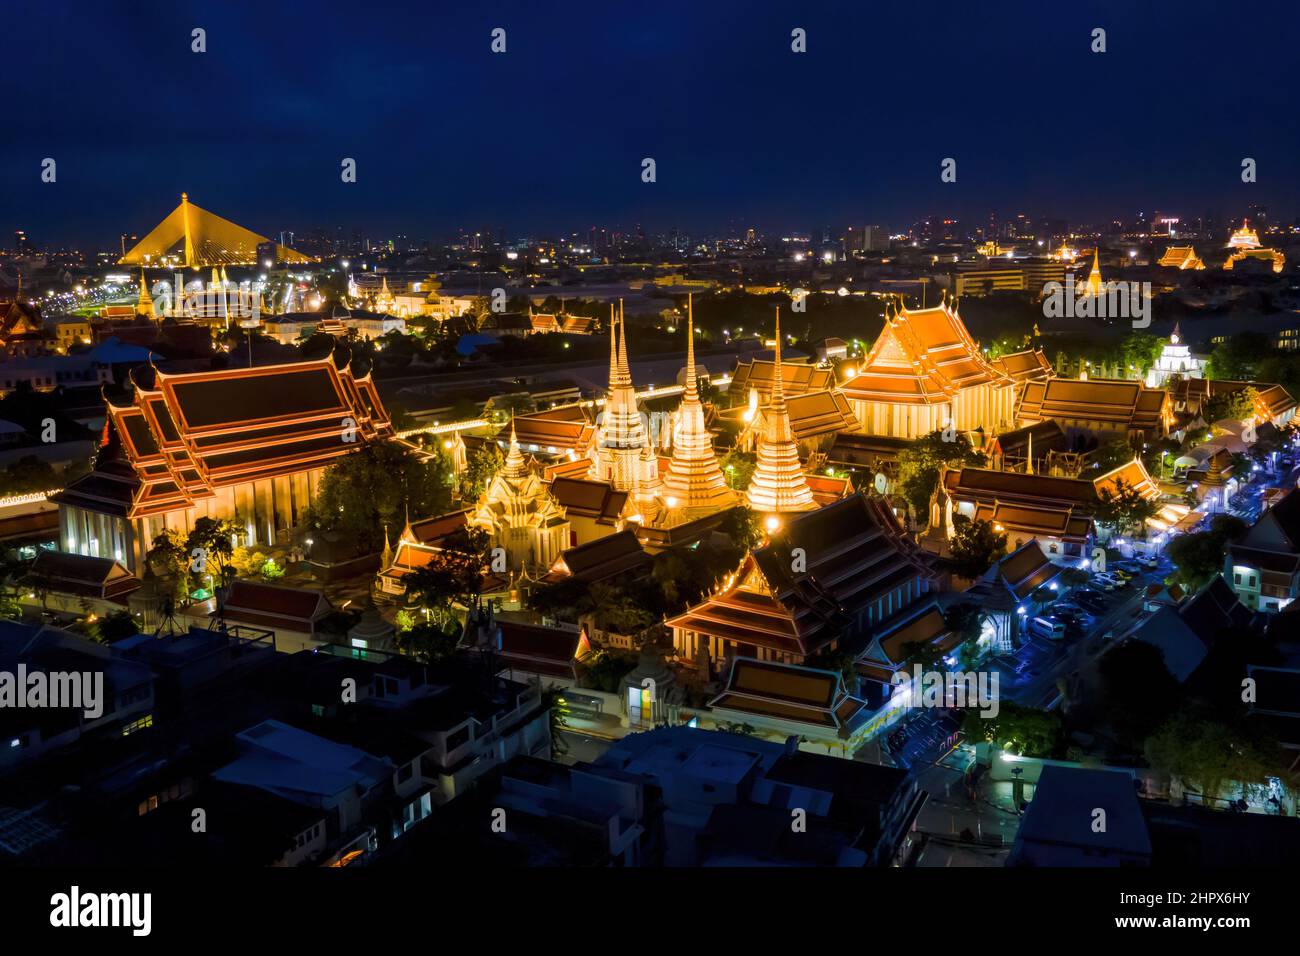 July 25, 2021, Bangkok, Thailand: (EDITOR'S NOTE: Image taken with drone).Aerial view of the Grand Palace in Bangkok.Two of Thailand's most famous cultural heritage sites and tourist attractions, Wat Arun (Temple of Dawn) and The Grand Palace, are illuminated at night along the Chao Praya River in Bangkok. The Thai Government recently announced eased entry requirements for international tourists visiting Thailand amidst a surge in the Omicron variant of COVID-19 throughout the country, with cases topping 20,000 reported infections per day. (Credit Image: © Matt Hunt/SOPA Images via ZUMA Press Stock Photo